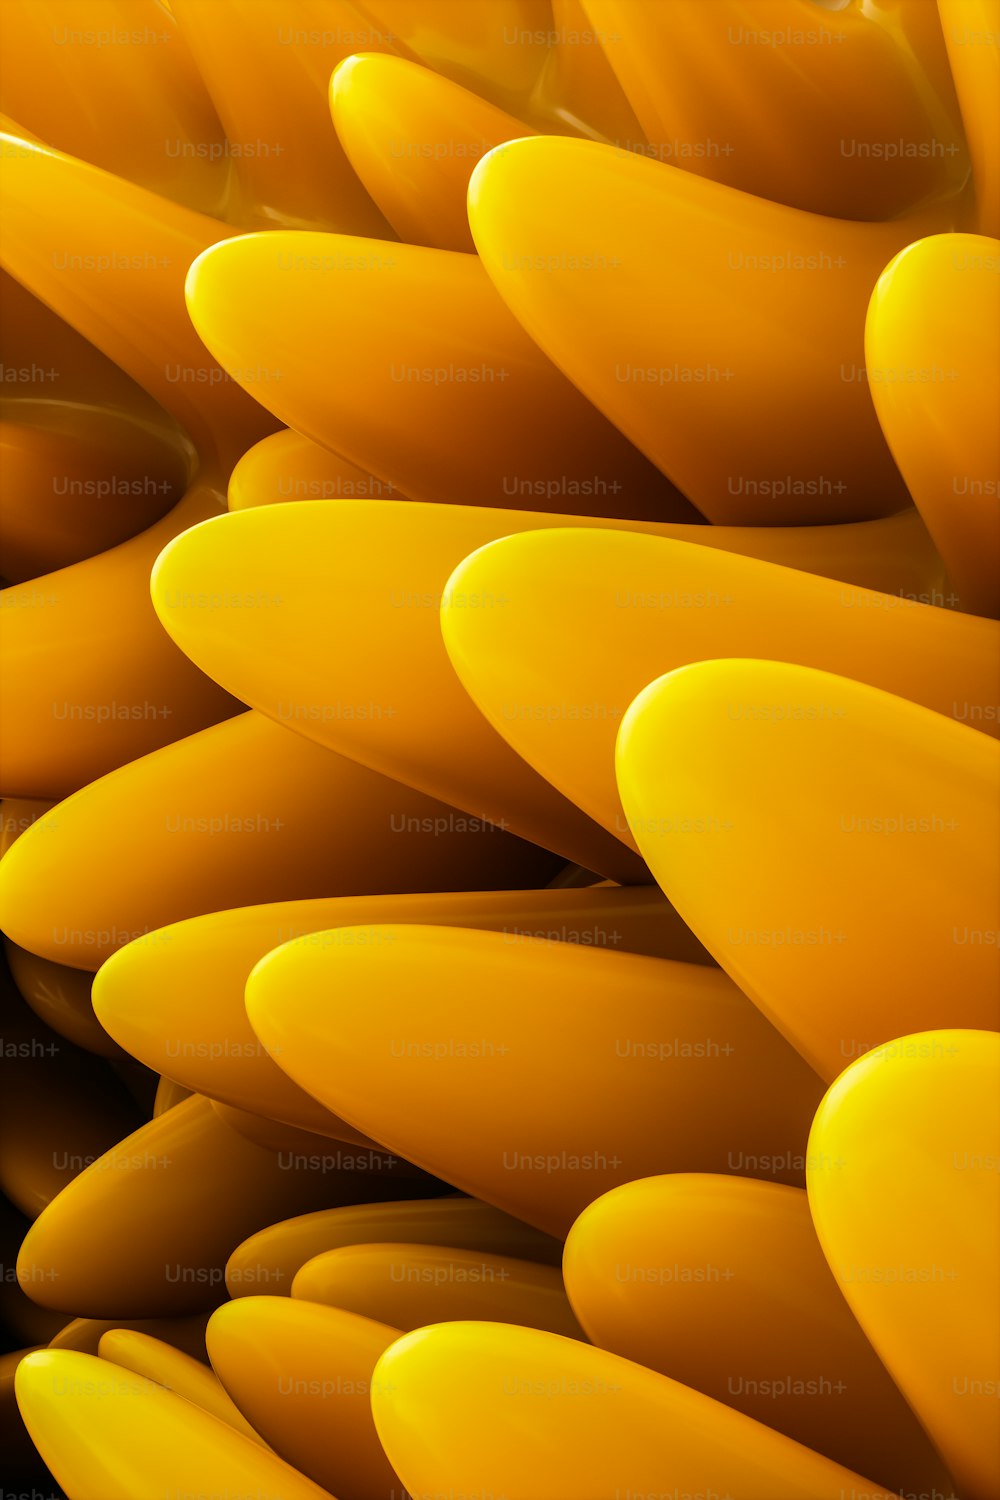 a close up of a bunch of yellow bananas